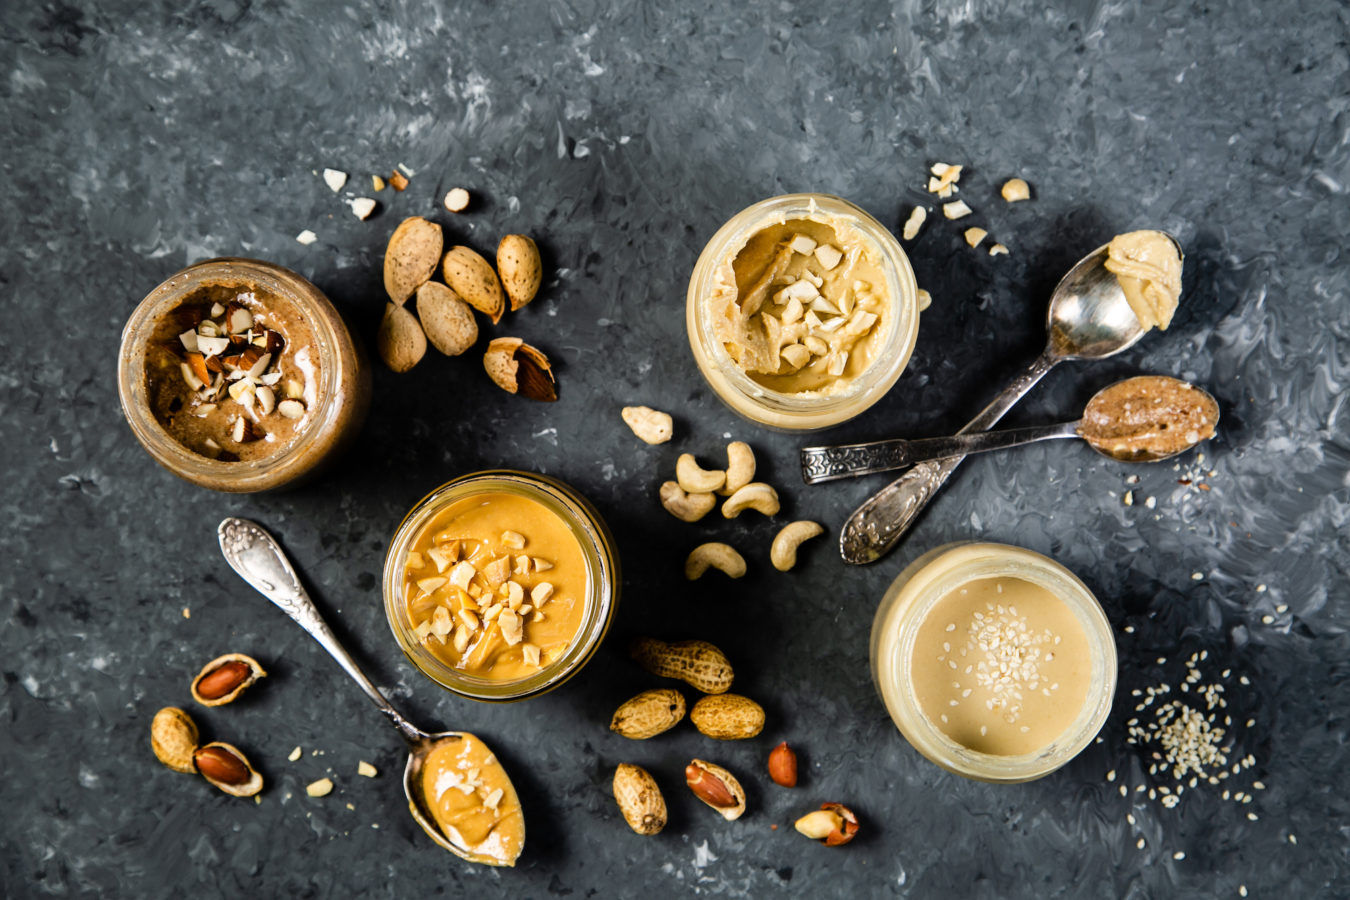 5 delicious nut butter alternatives worth trying, according to nutritionists